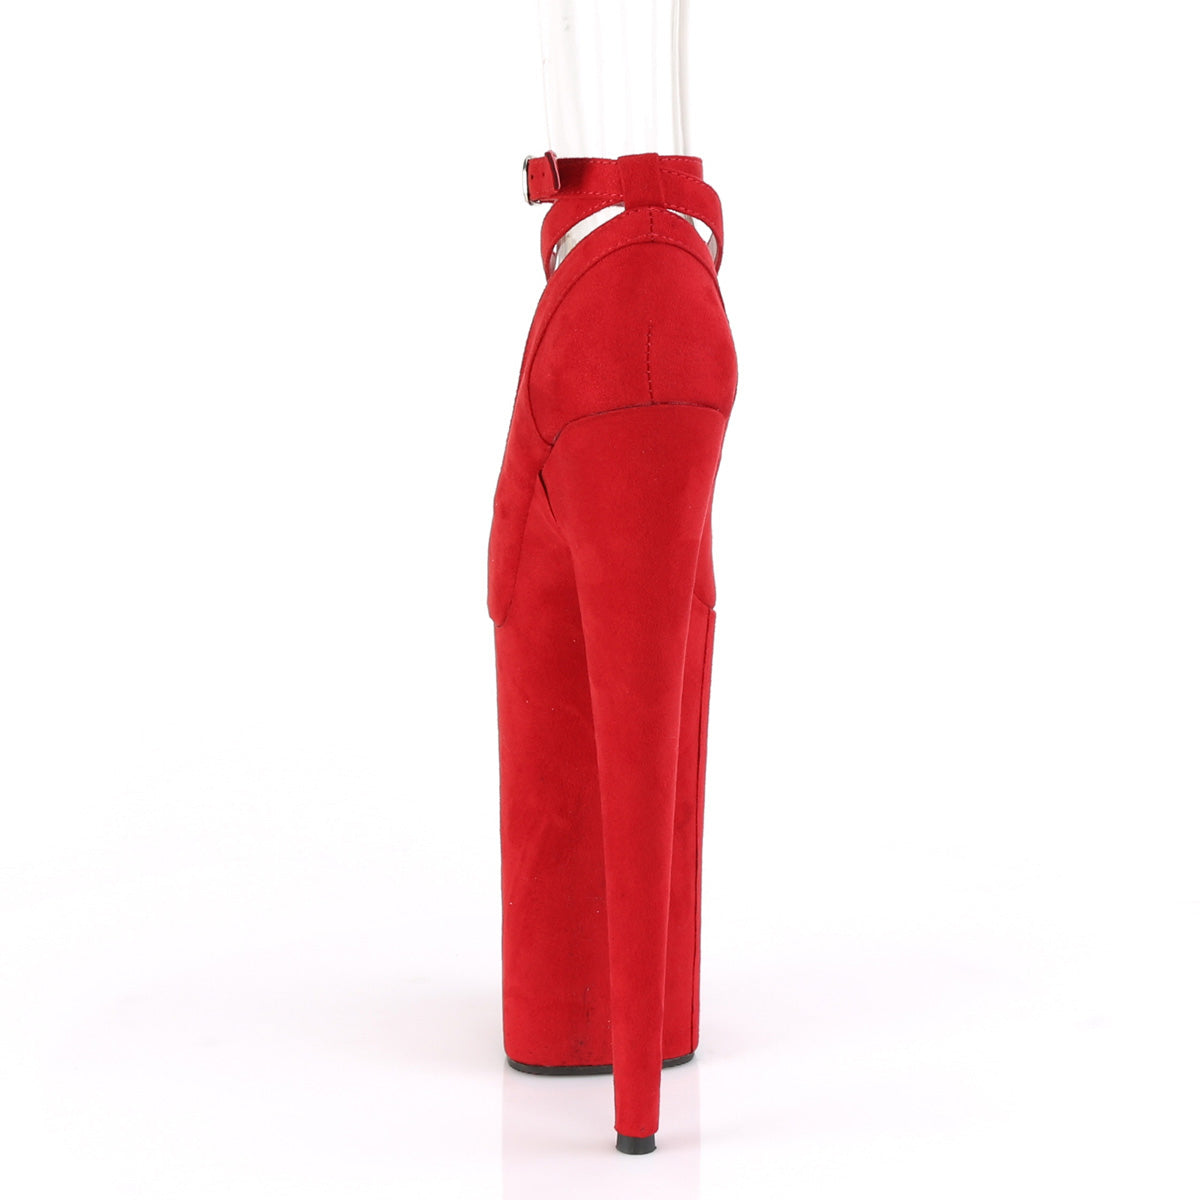 Pleaser Sandali da donna BEYOND-087FS RED FAUX Suede / Red Faux Suede